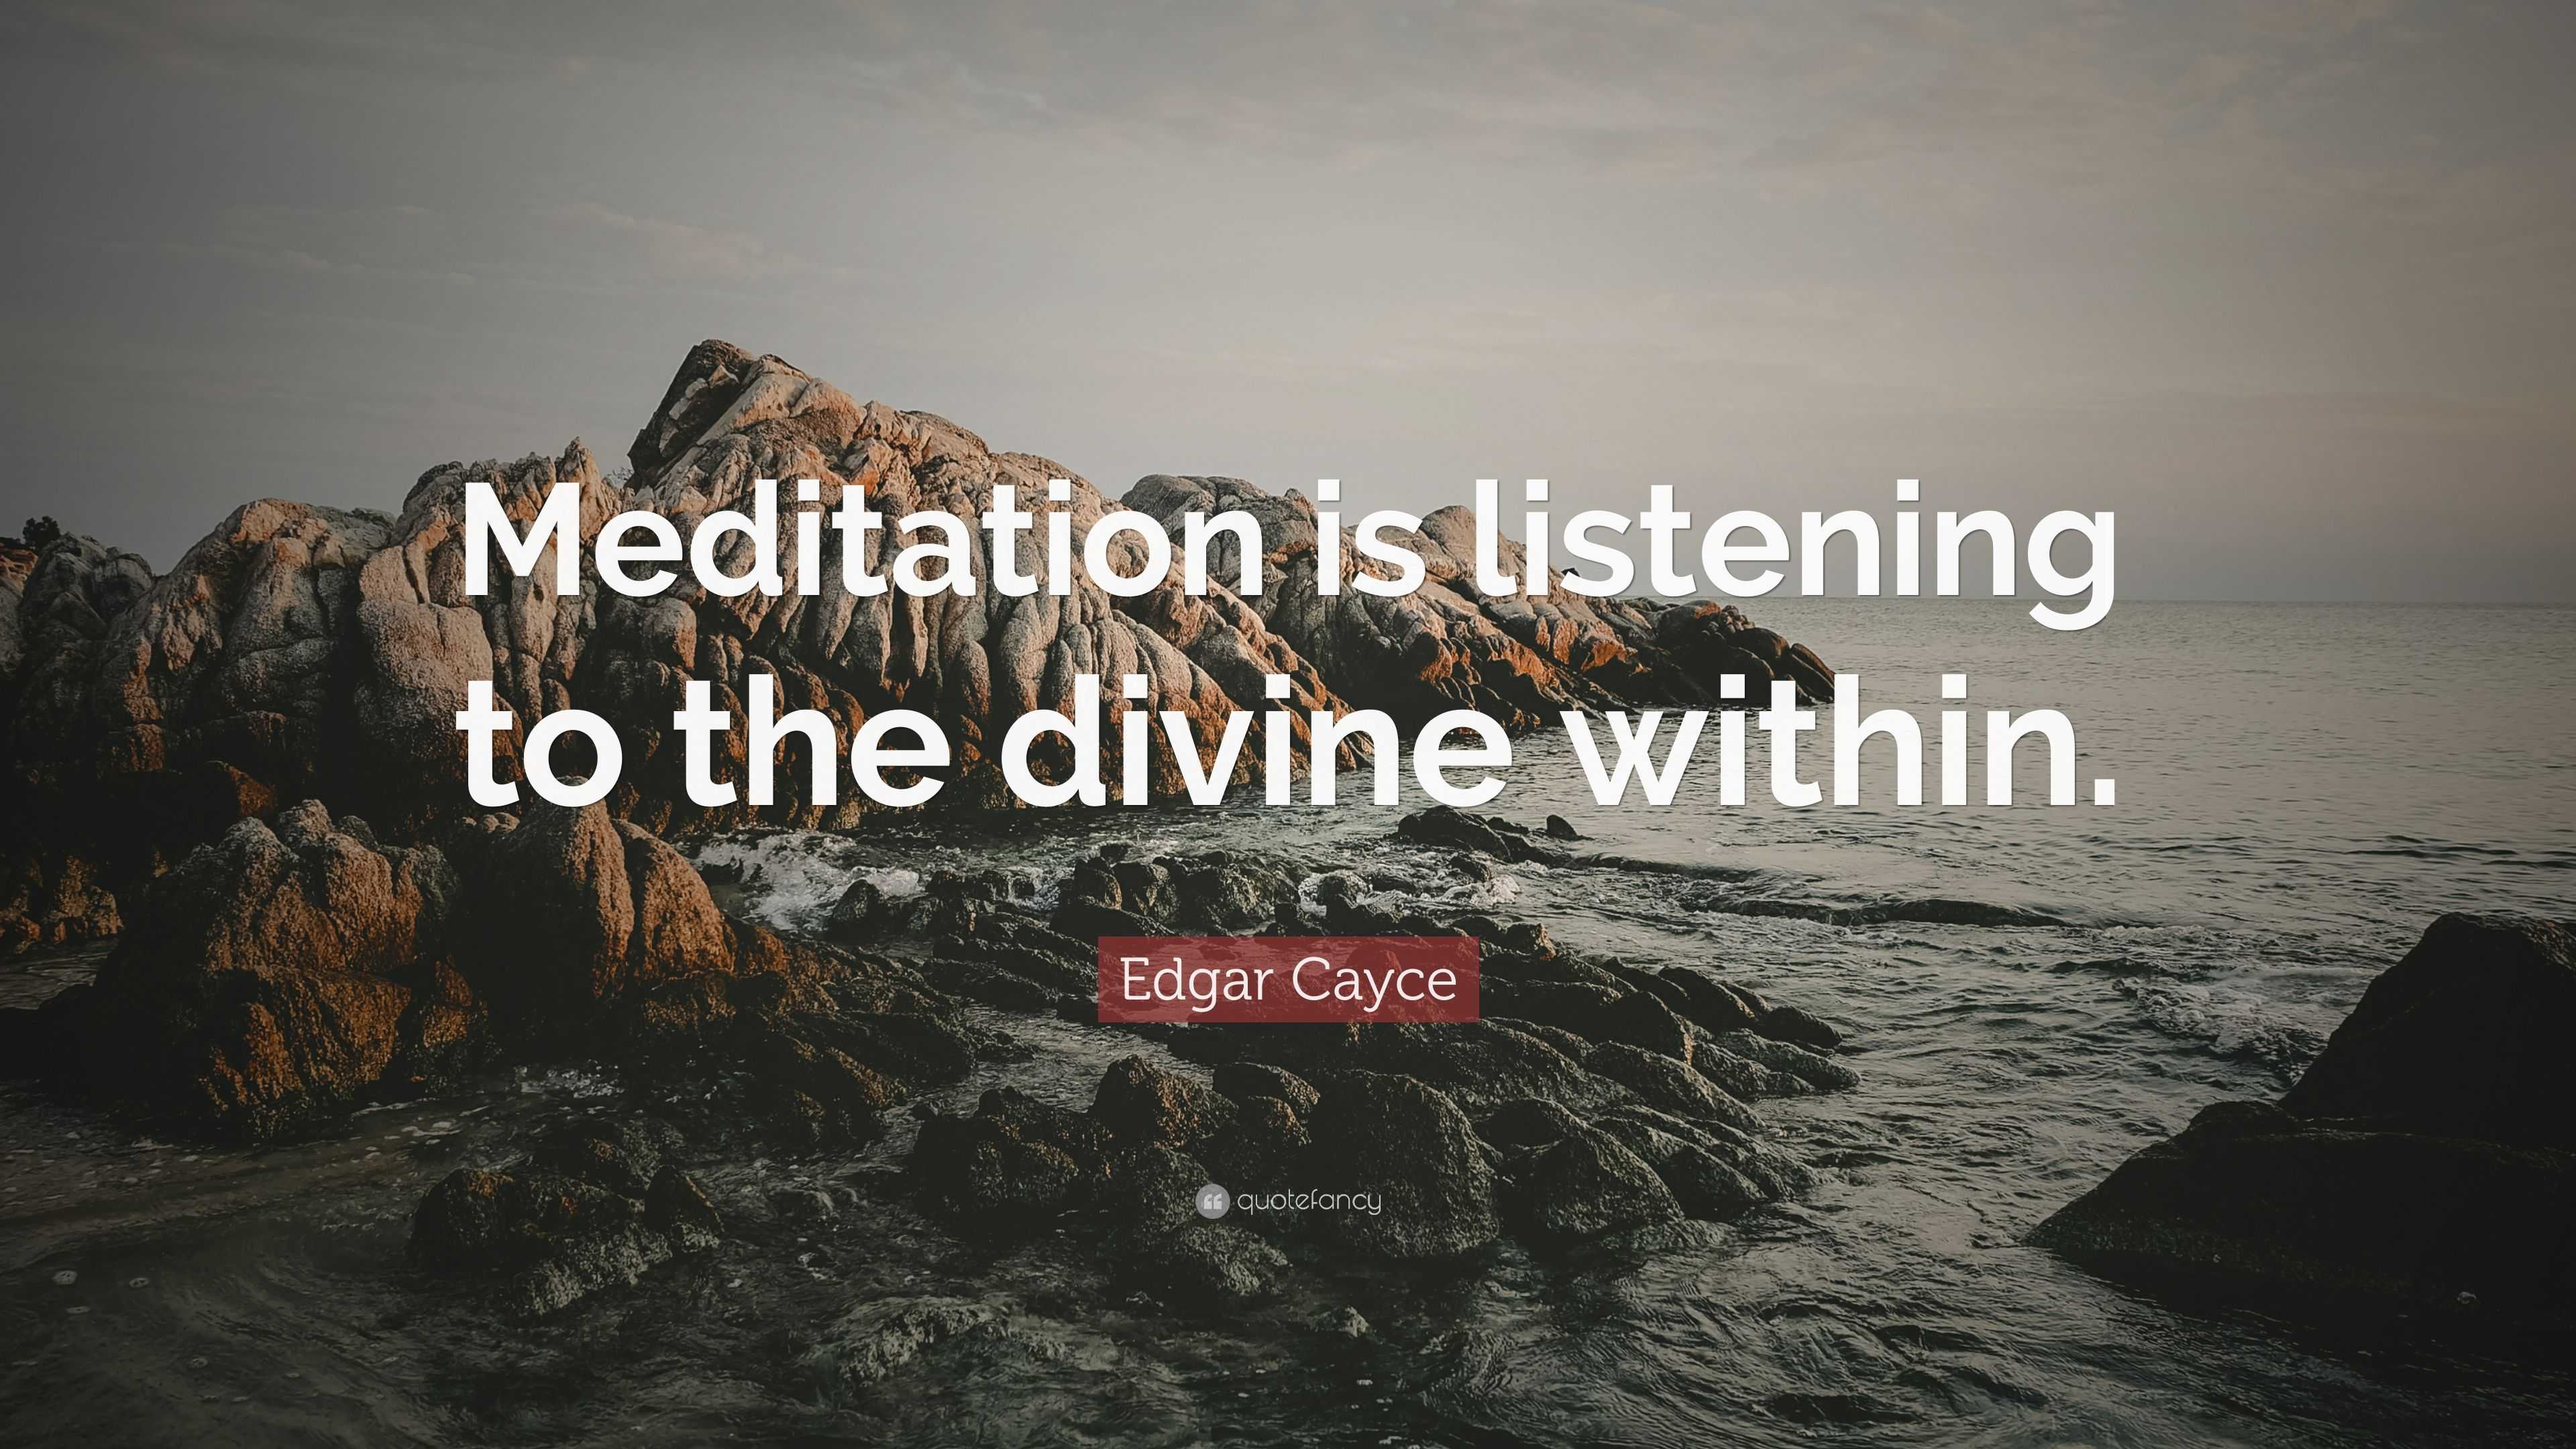 Edgar Cayce Quote: “Meditation is listening to the divine within.”